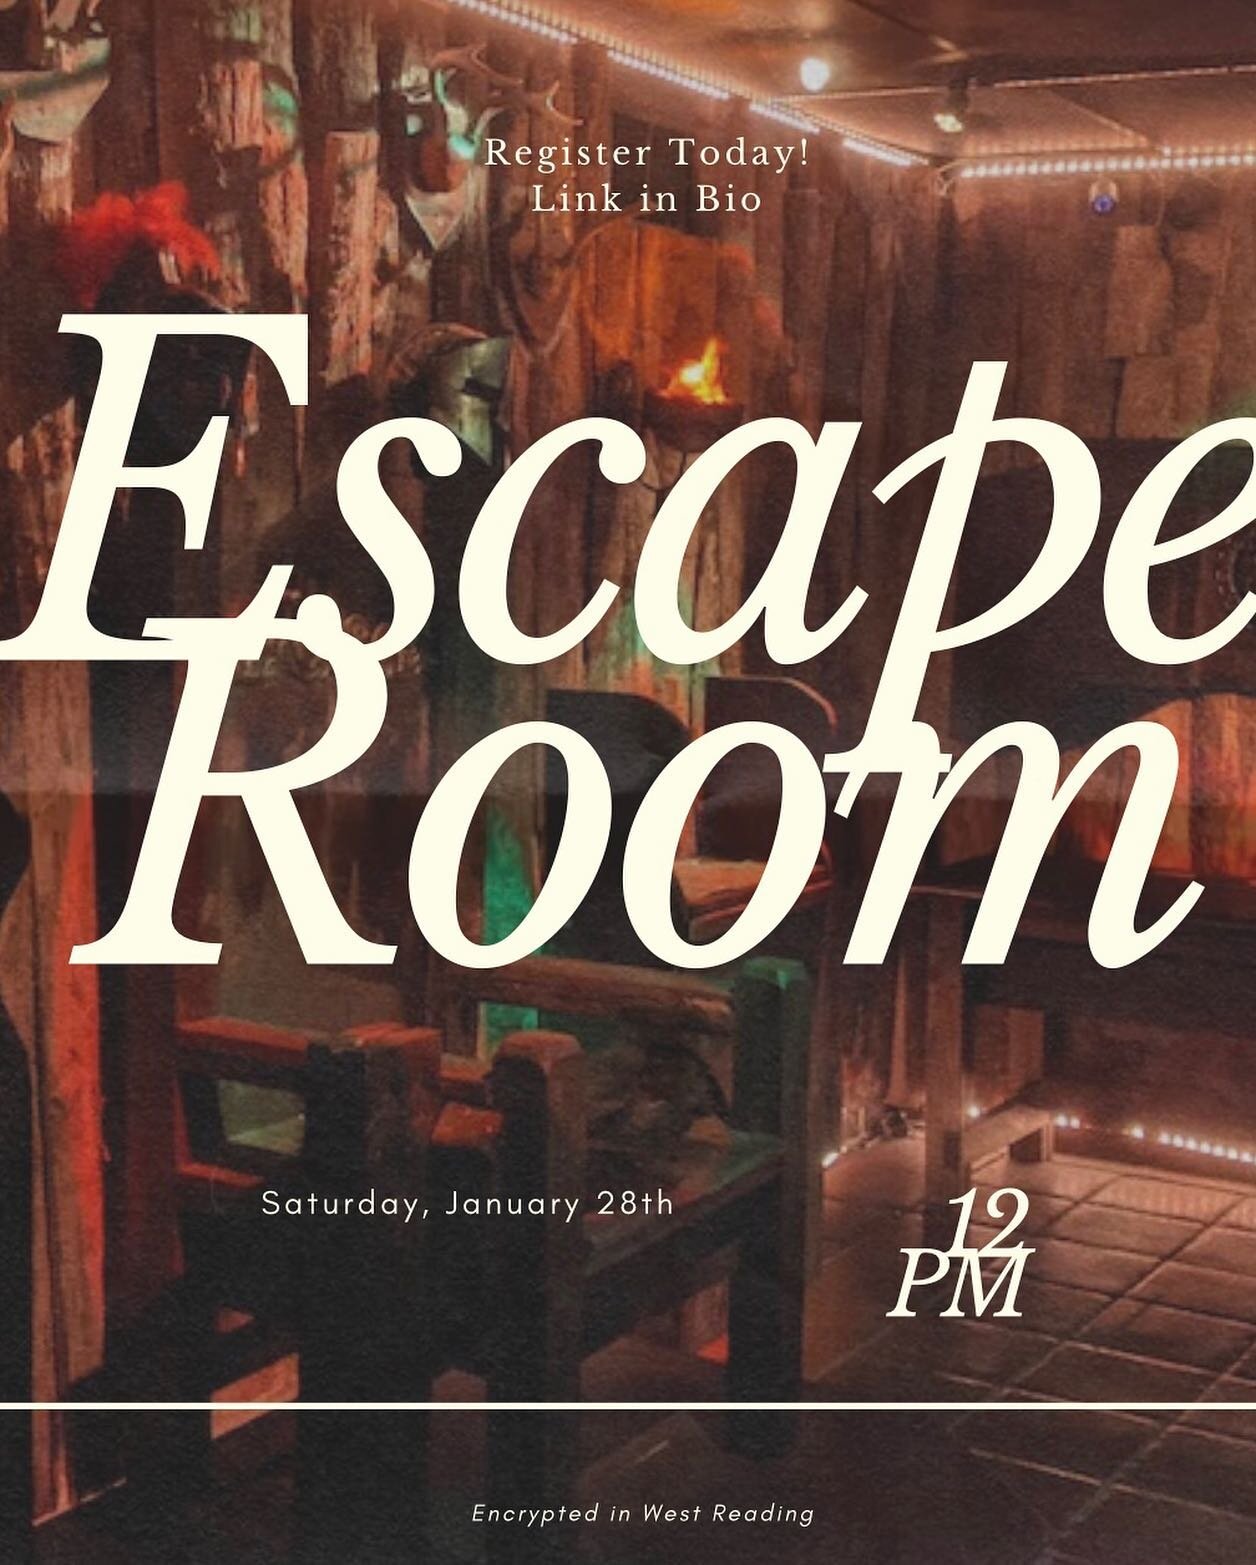 This Saturday (January 28th), GCYA is going to Encrypted in West Reading, to escape a Viking Raid! This will be a great time of team building, problem solving, &amp; collaboration.

Will we work together to escape on time, or fold under pressure? 🤔
